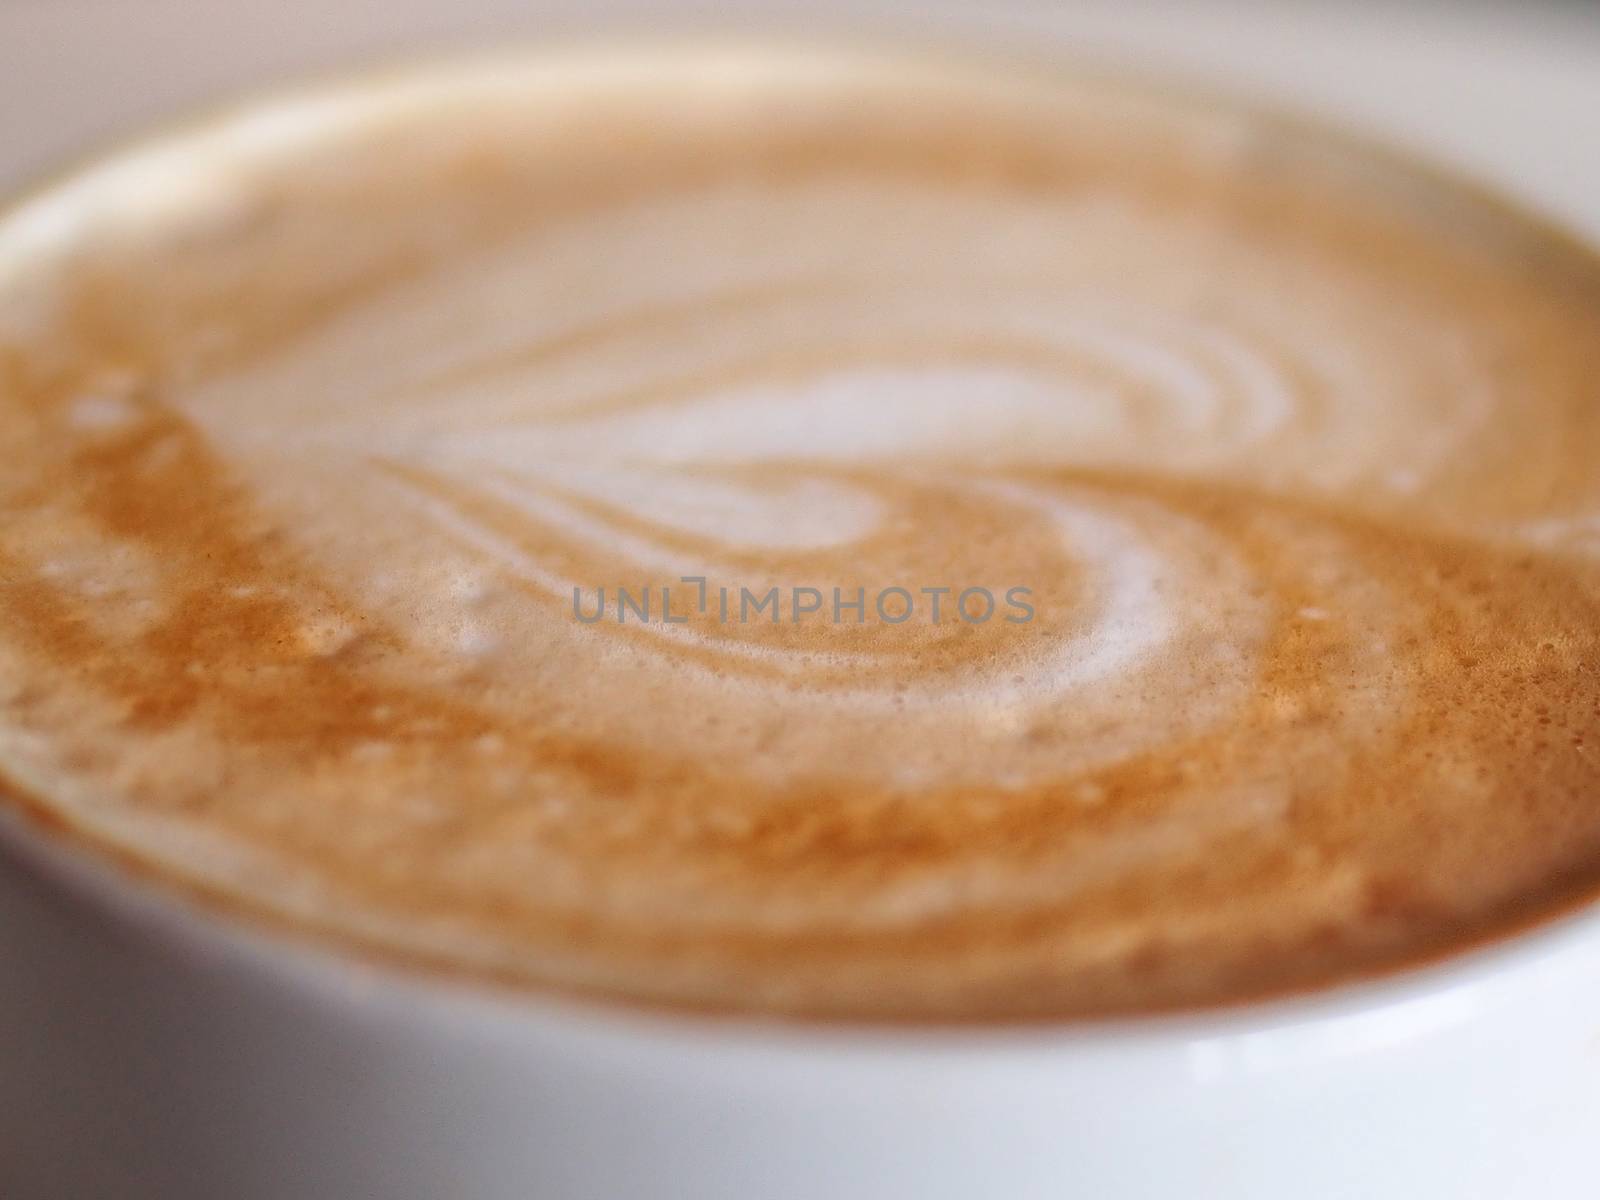 Heart drawing on latte art coffee by stockyimages